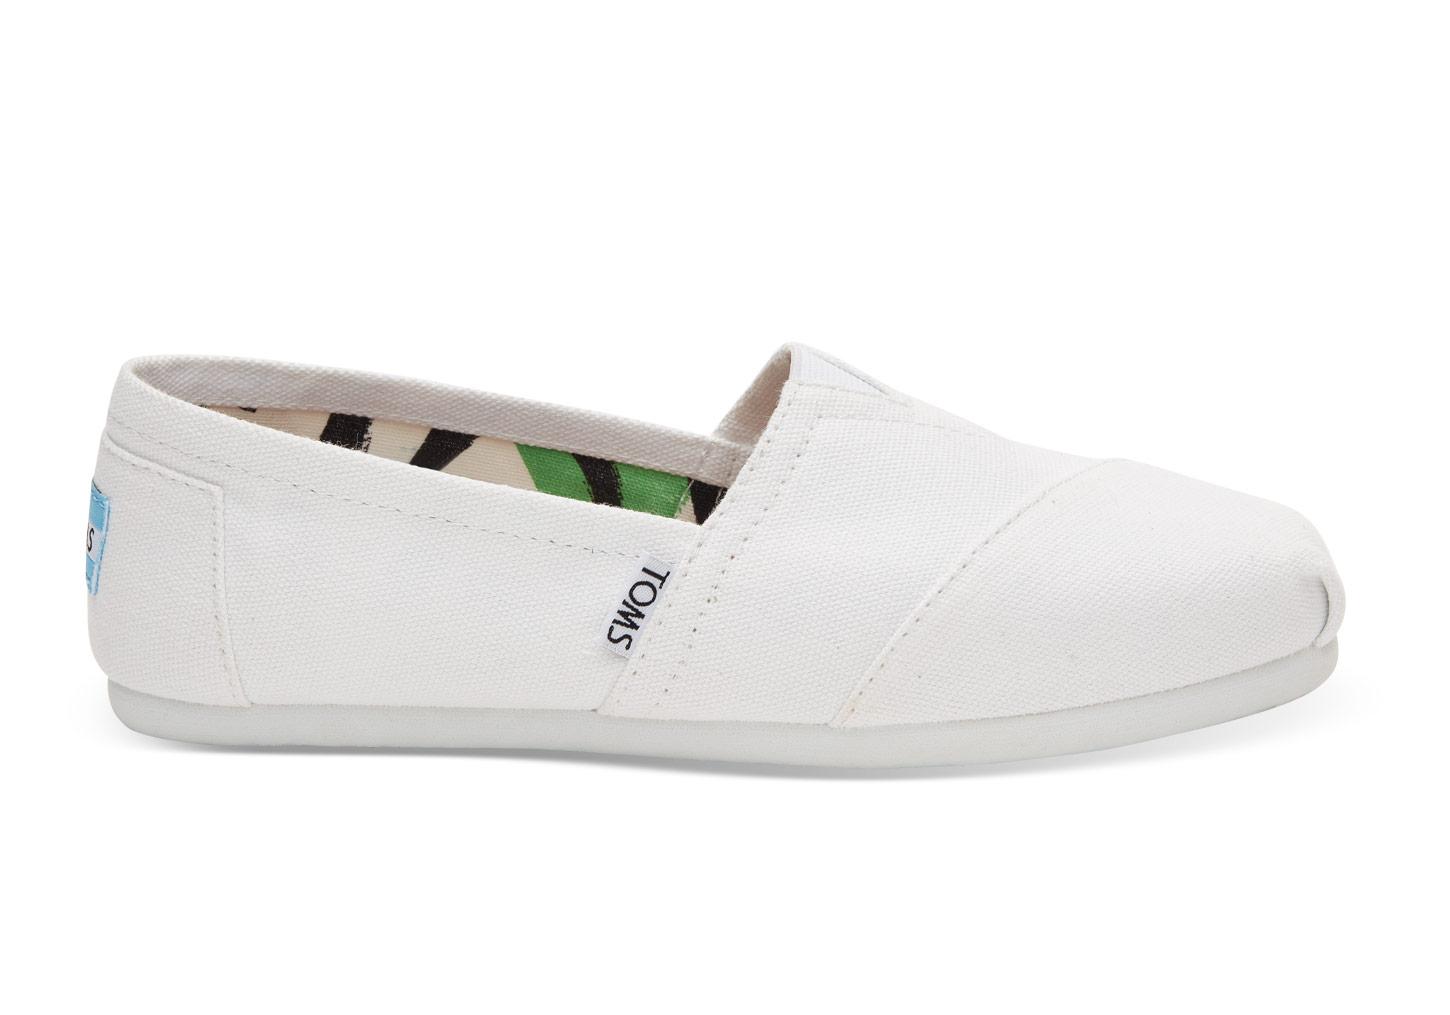 Toms Optic White Canvas Women's Classics in White | Lyst